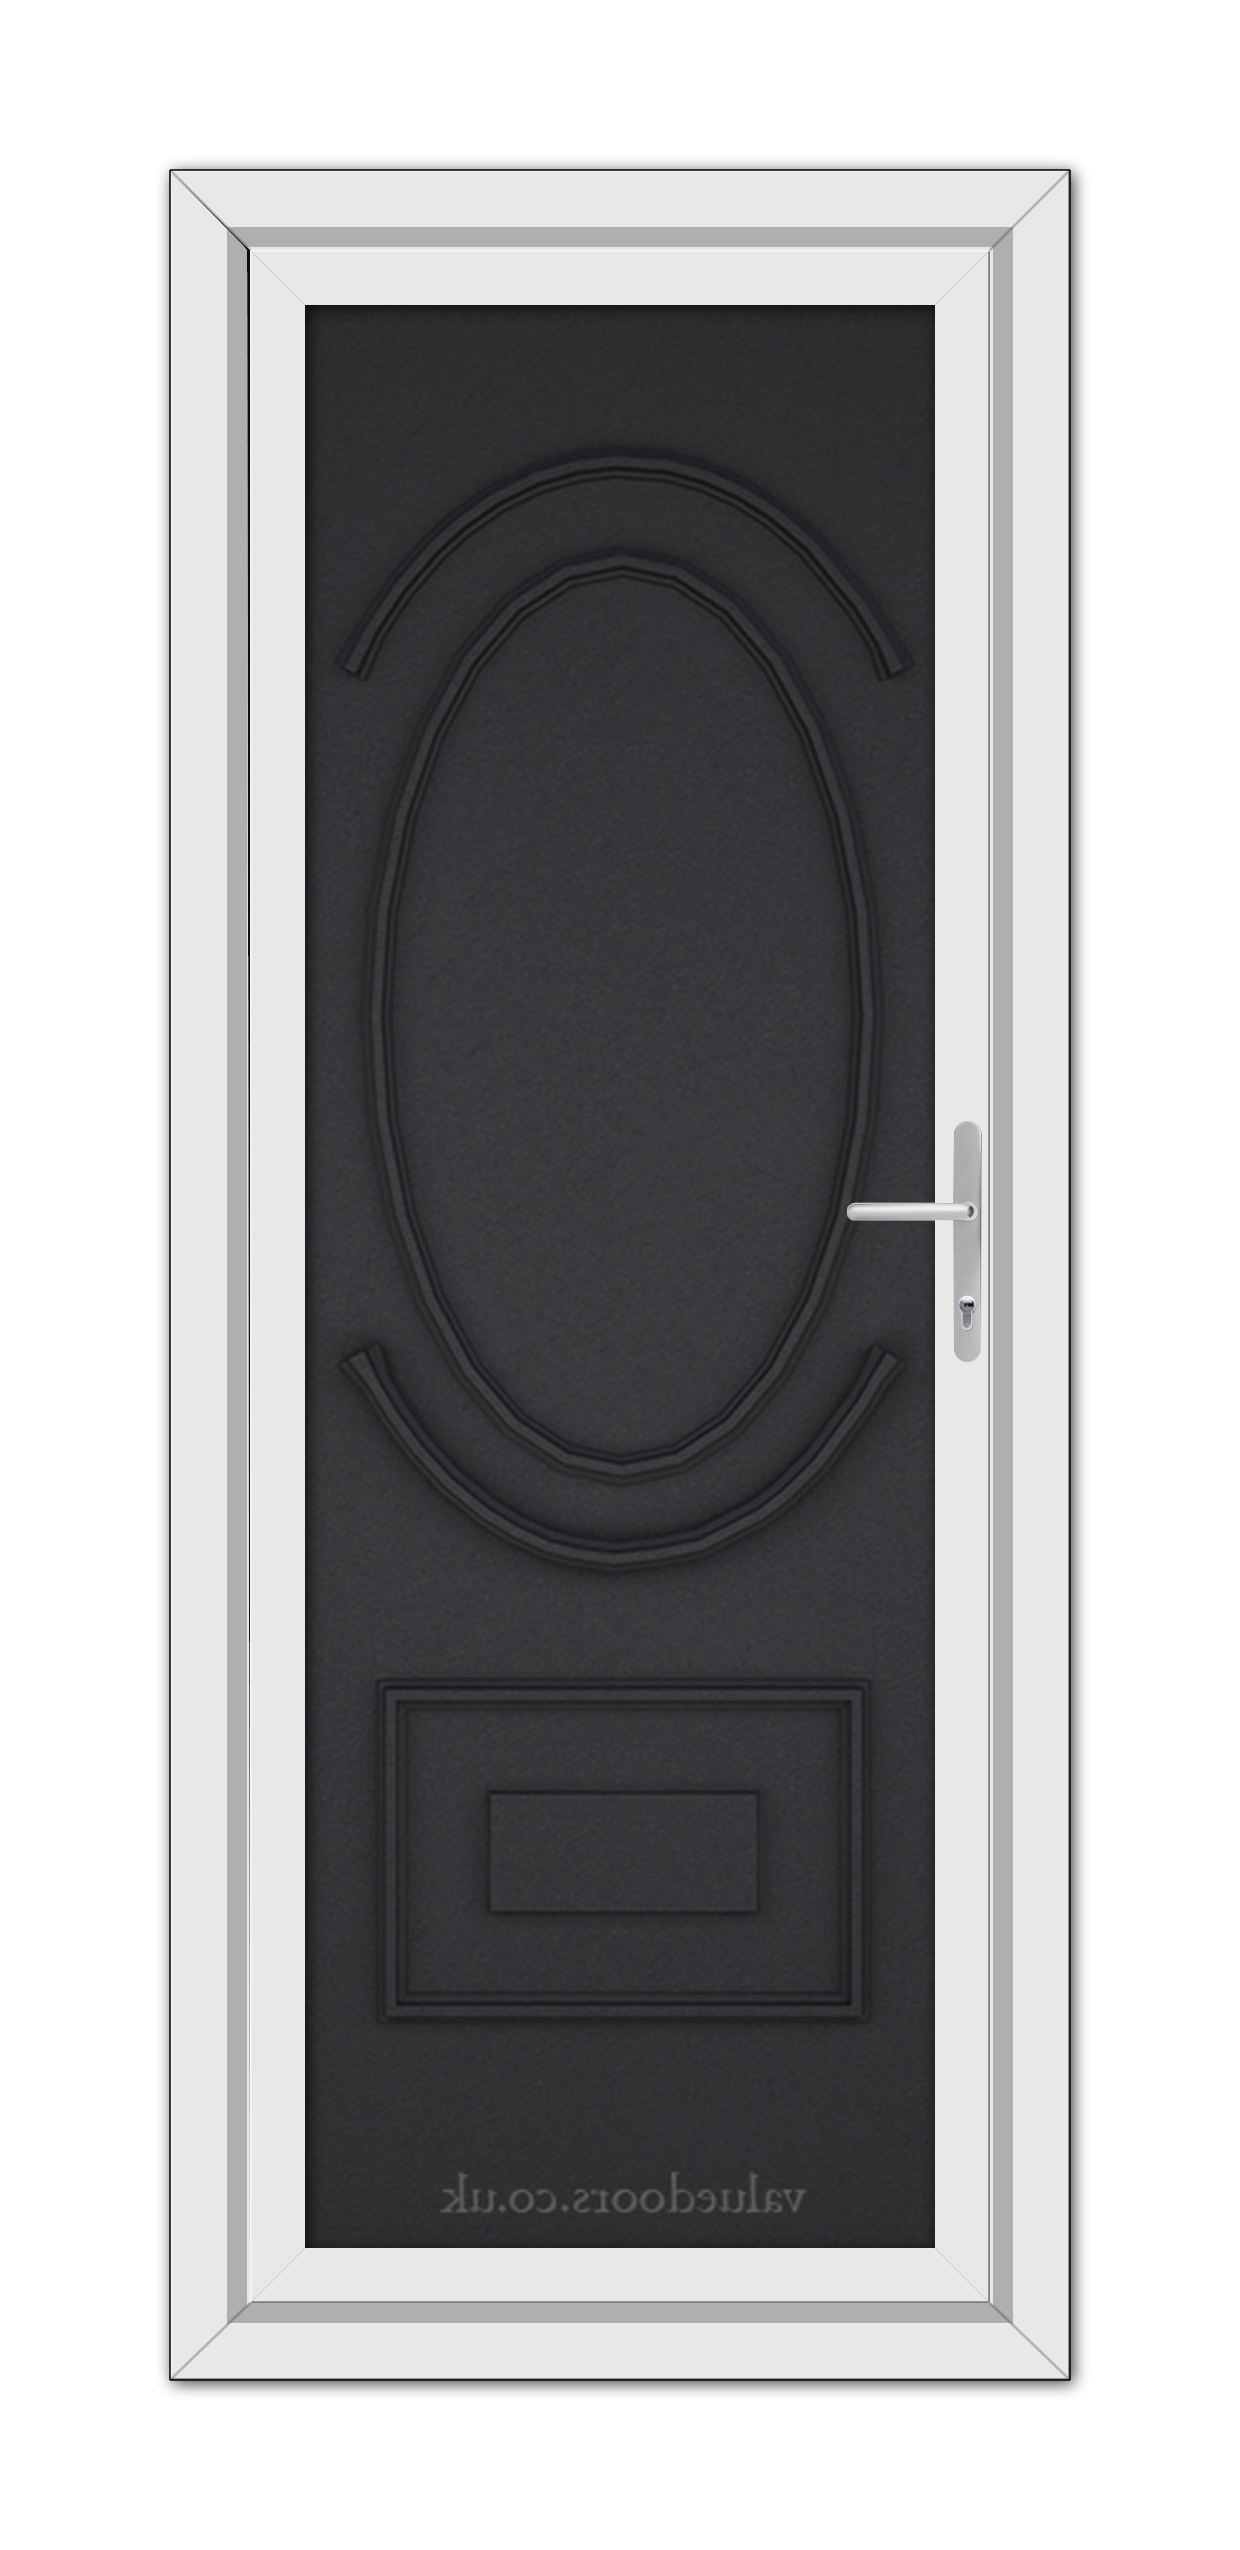 A modern Black Brown Richmond Solid uPVC door with an oval window and silver handle set within a white frame, viewed from the front.